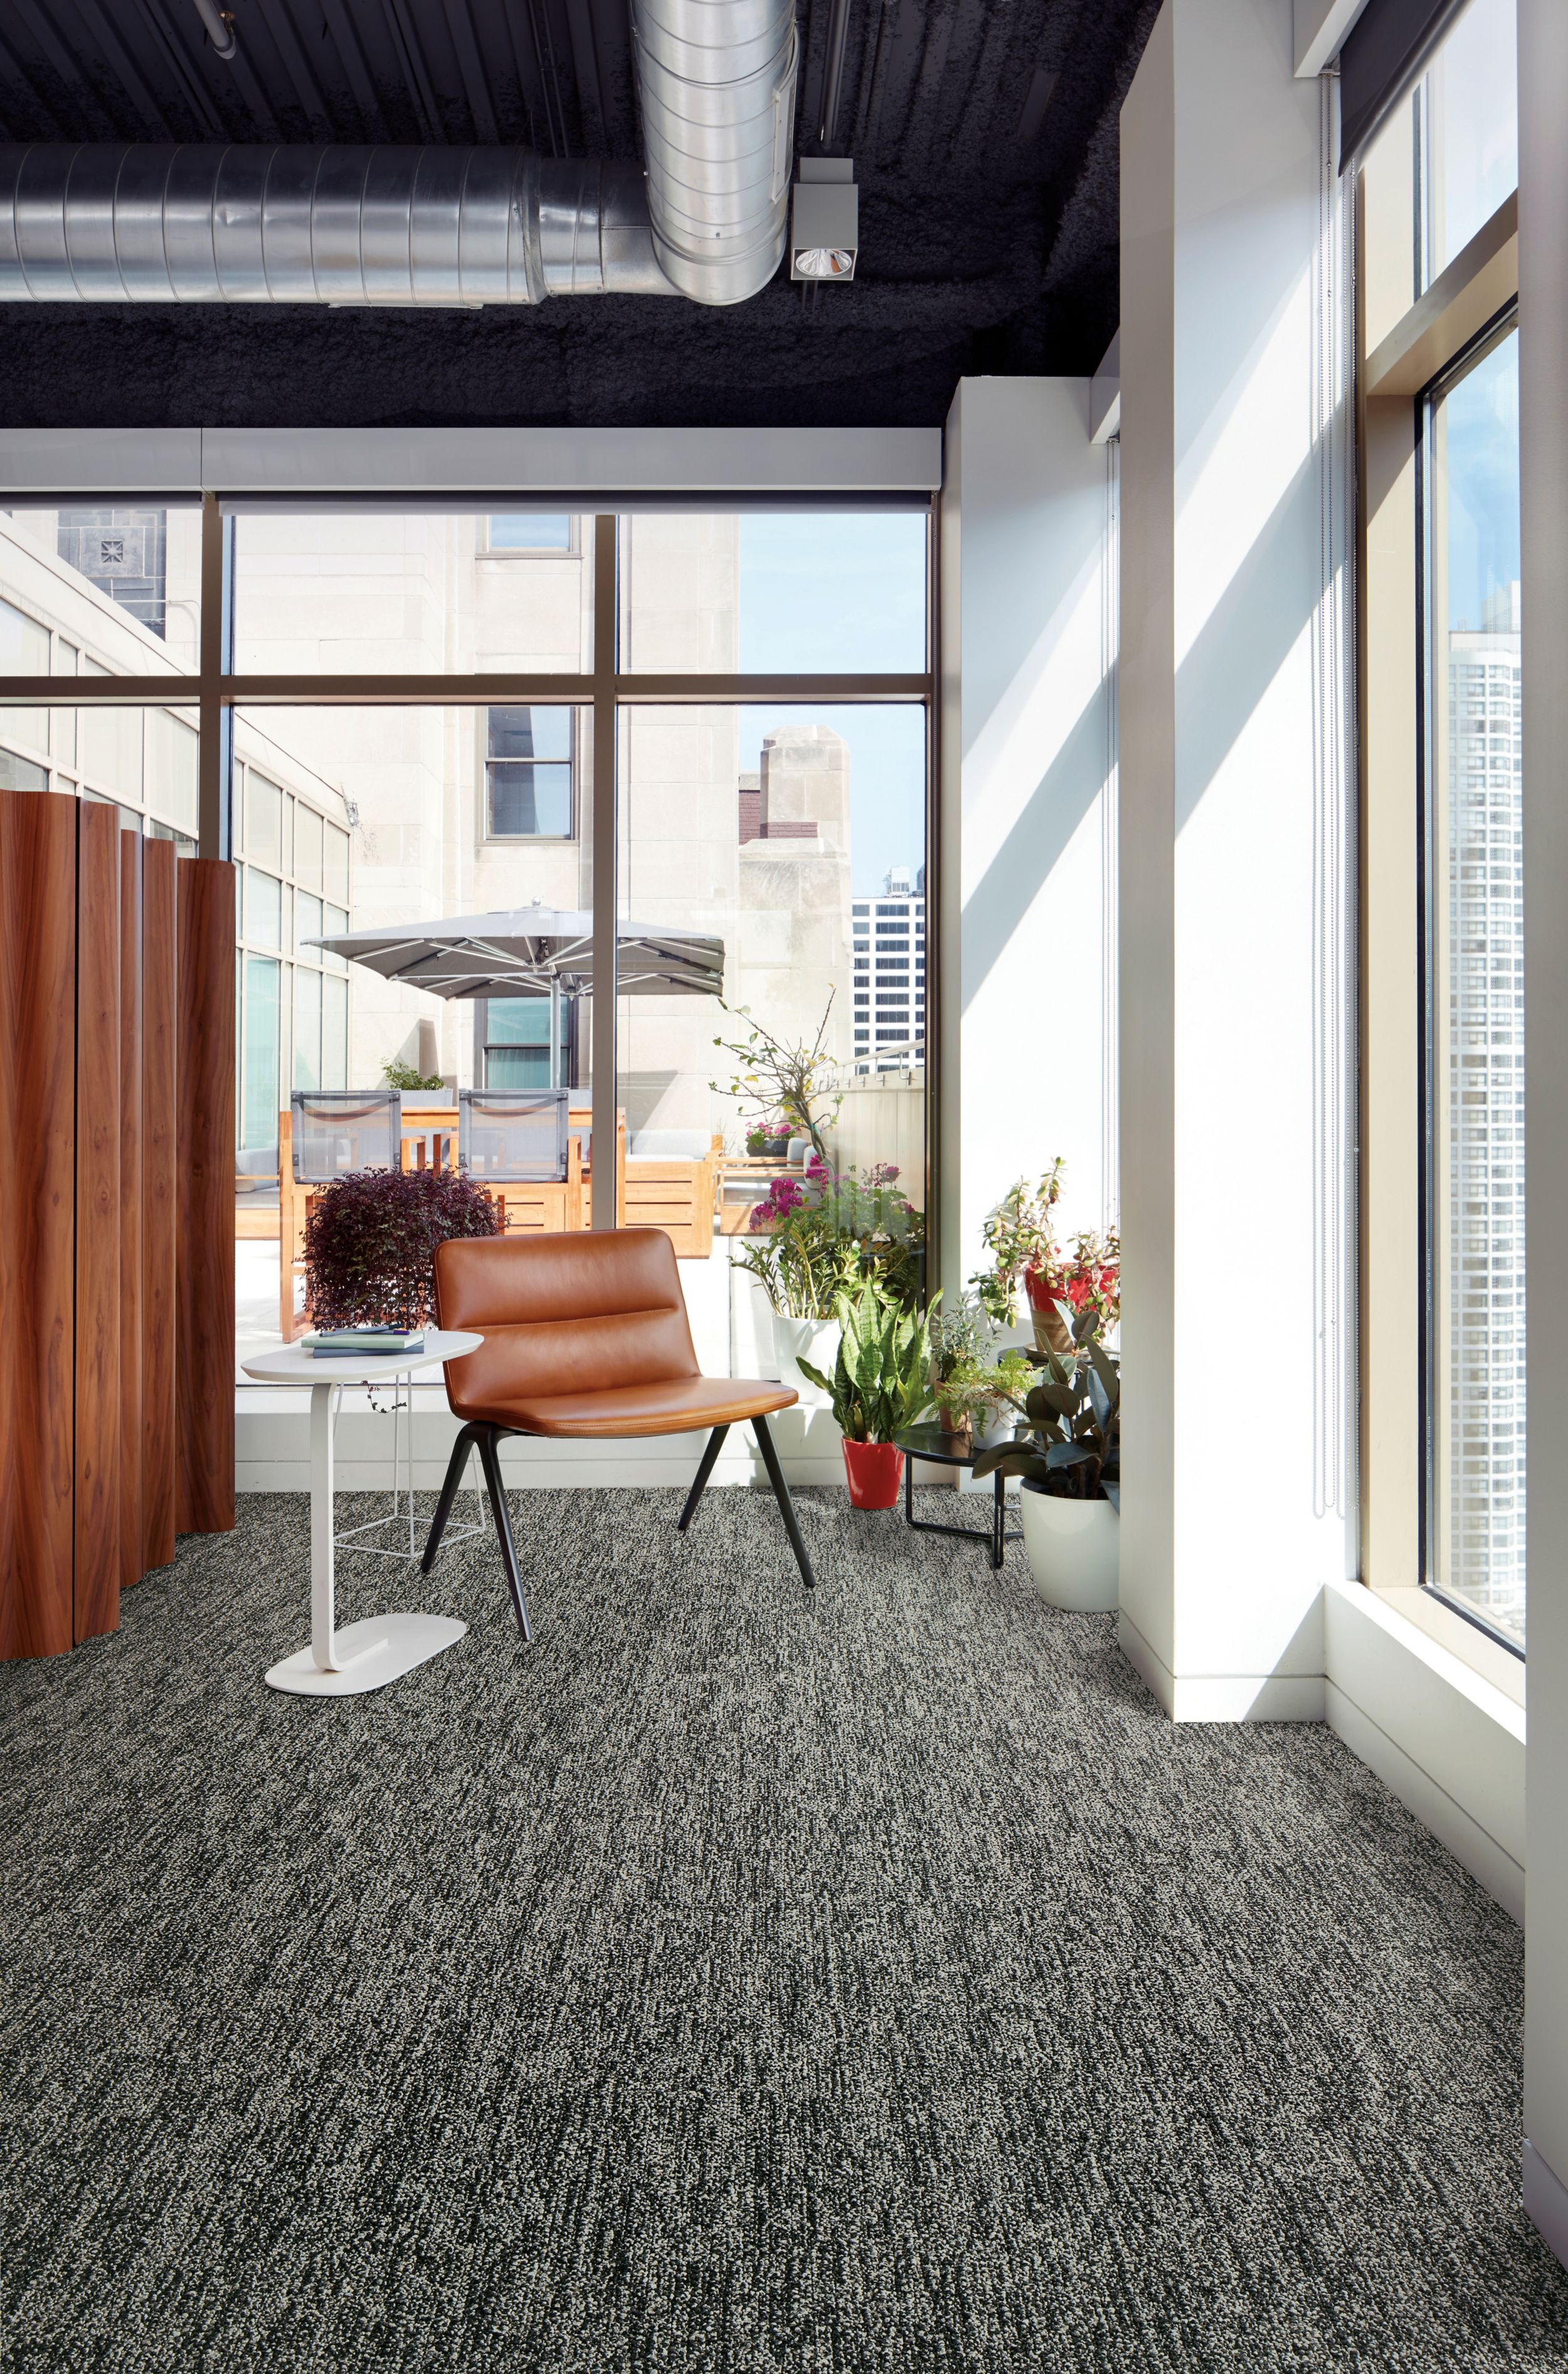 Interface Obligato plank carpet tile with leather chair and potted plants in windows image number 1